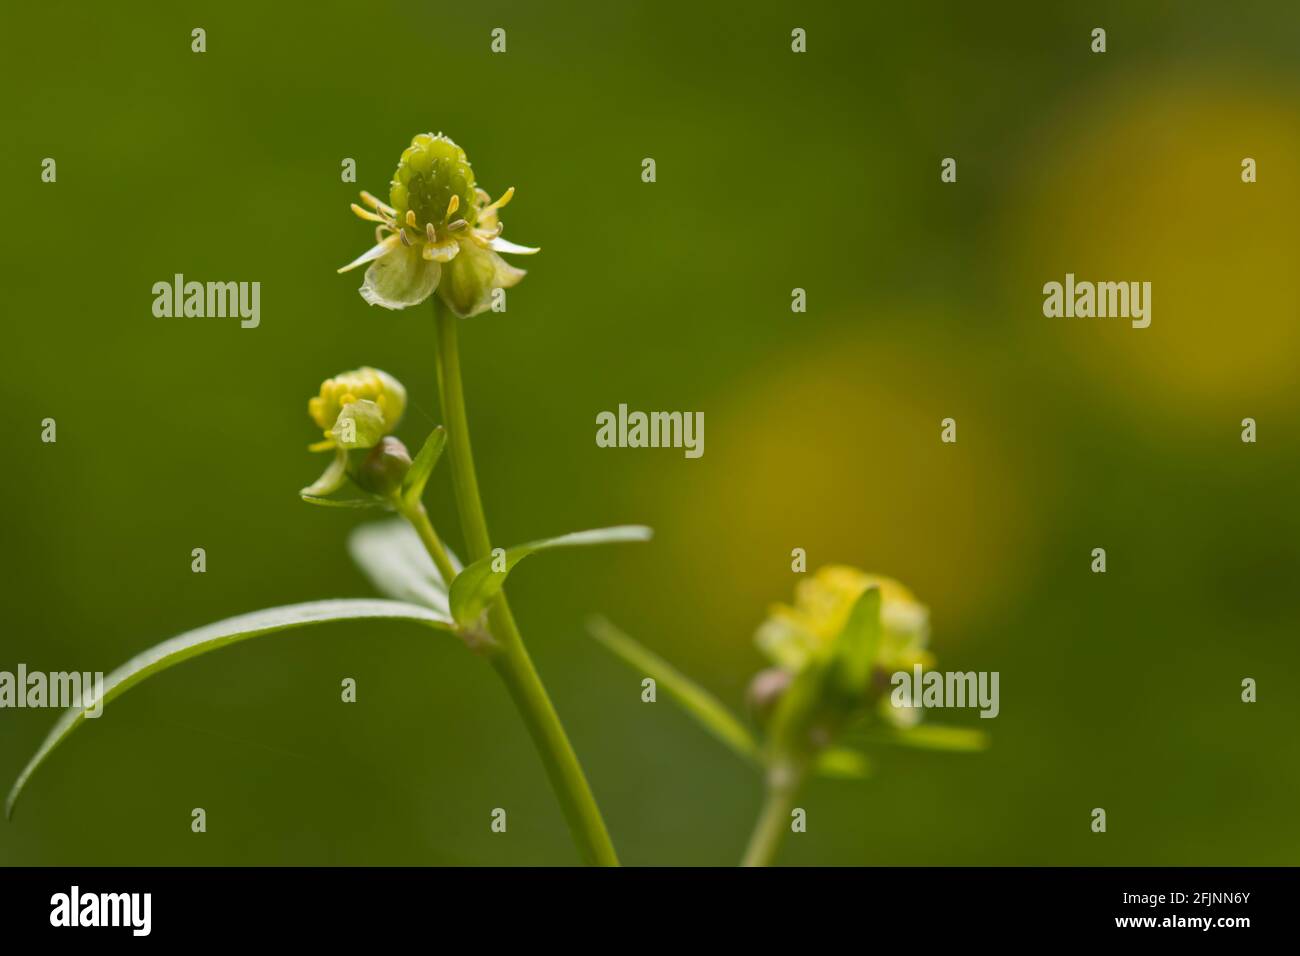 Macrophotography of tiny yellow flowers of a quick weed with blurred background. Stock Photo